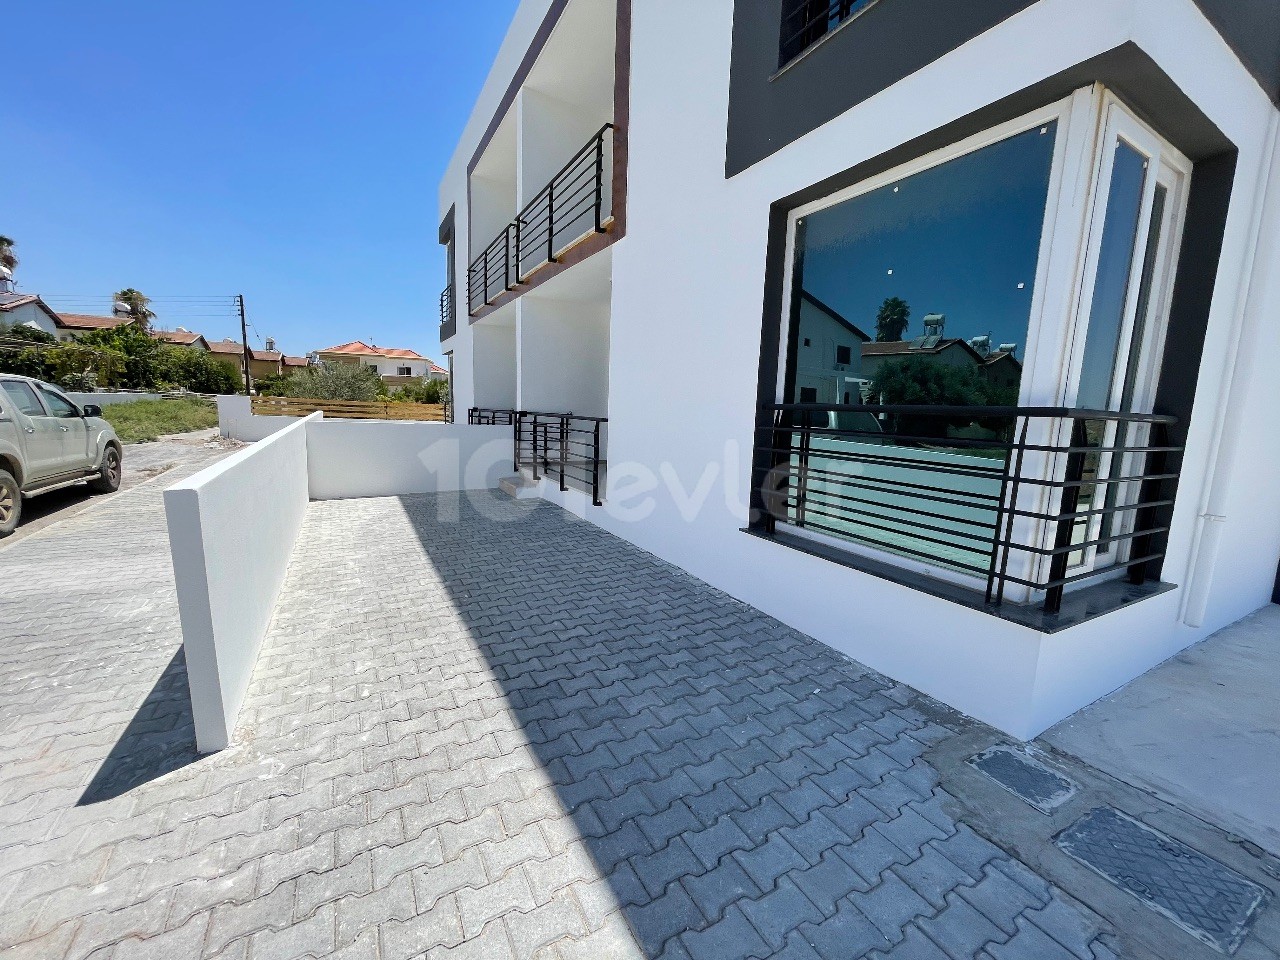 Ground FOR SALE in Yenikent District of Nicosia or 1. The Floor is Ready for Delivery in 2+1 Zero Apartments! ** 